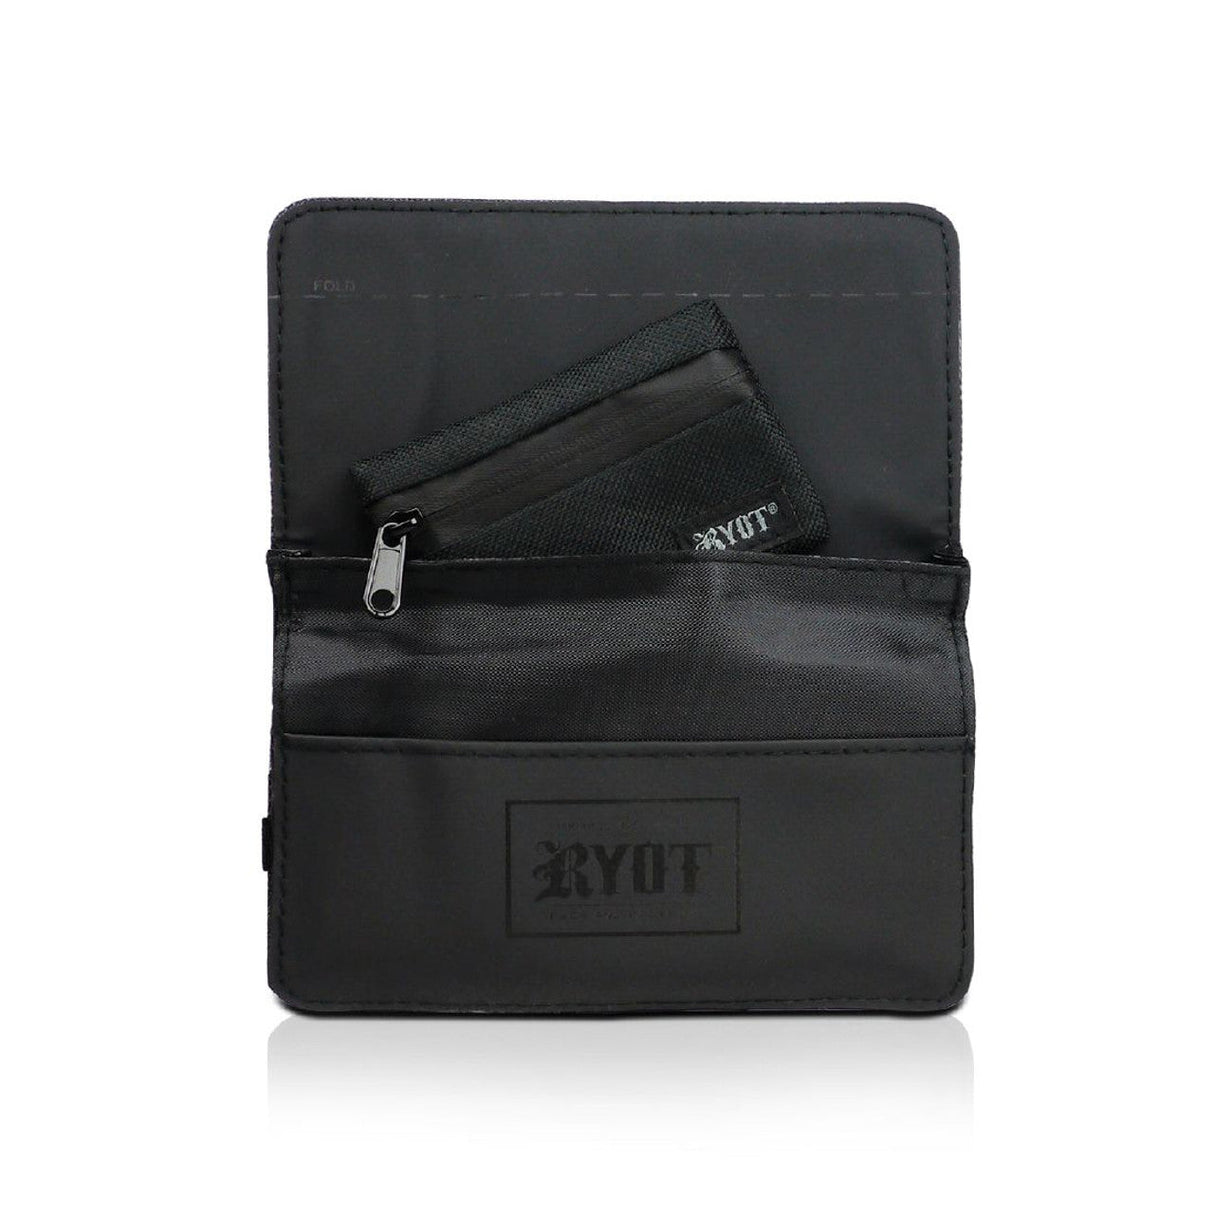 RYOT Roller Wallet in black, large size, front view with zipper compartment and logo